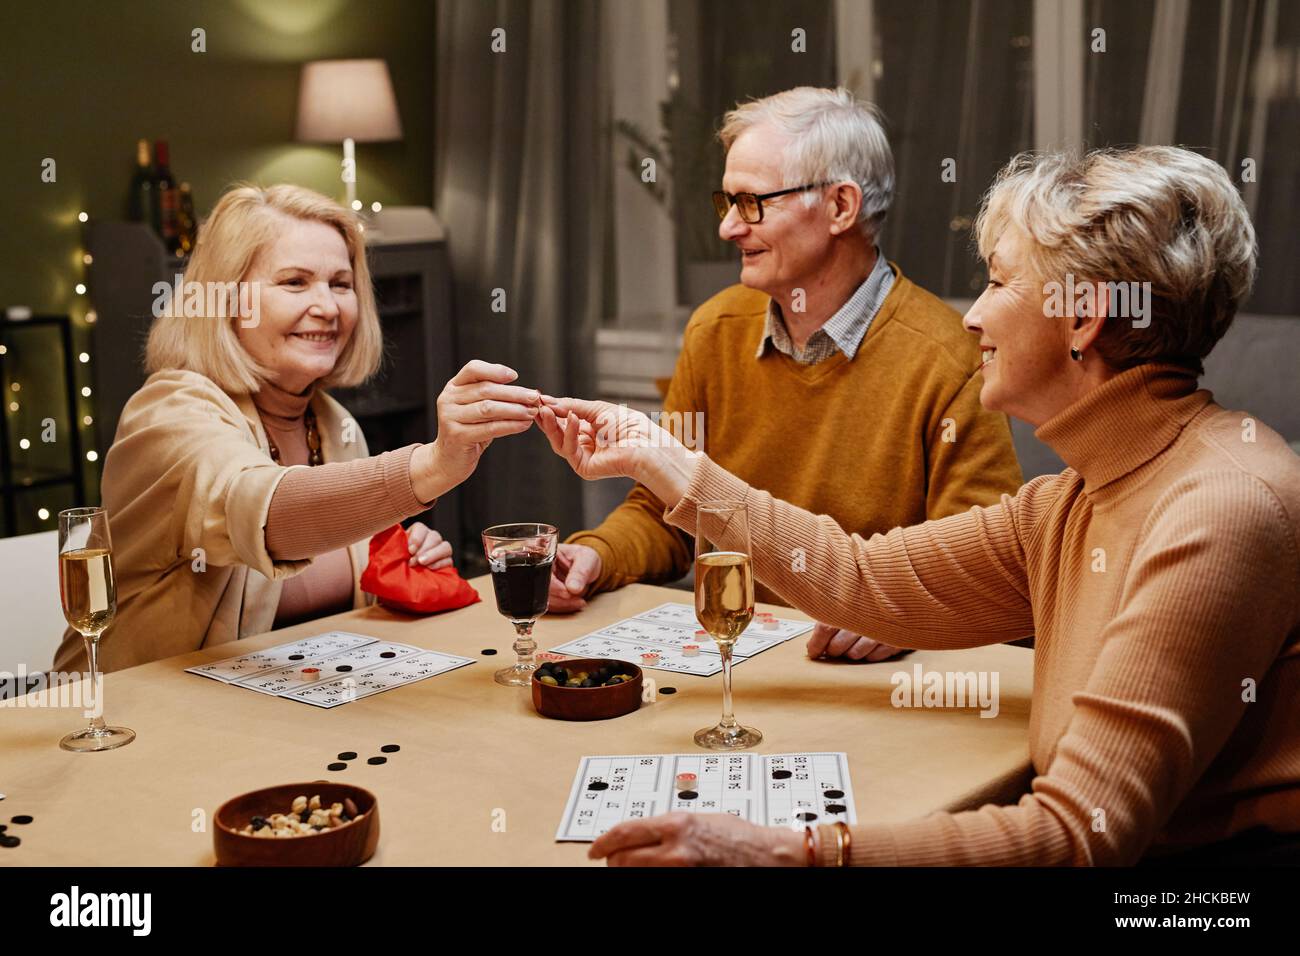 Two aged Caucasian women and man sitting at wooden table with snack and drinks during party and playing board game Stock Photo